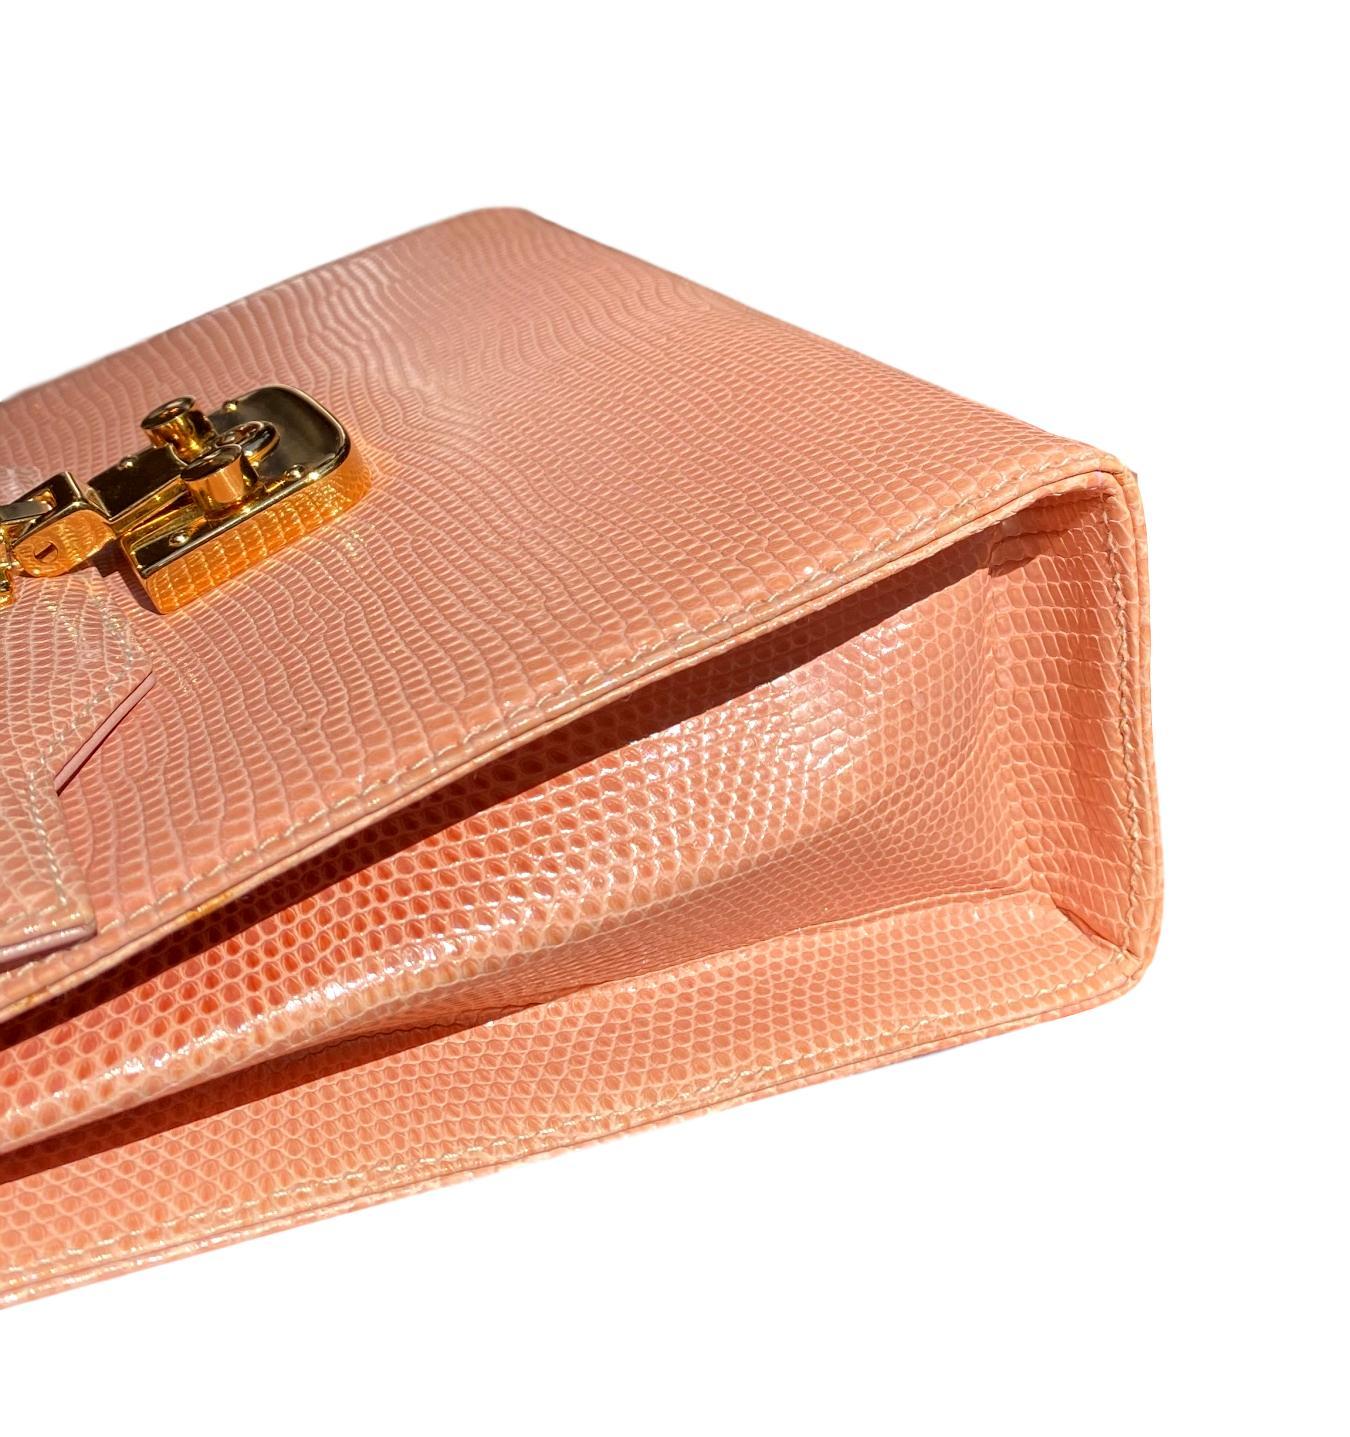 Gucci Exotic Lizard Blush Top Handle Kelly Style Shoulder Bag 2